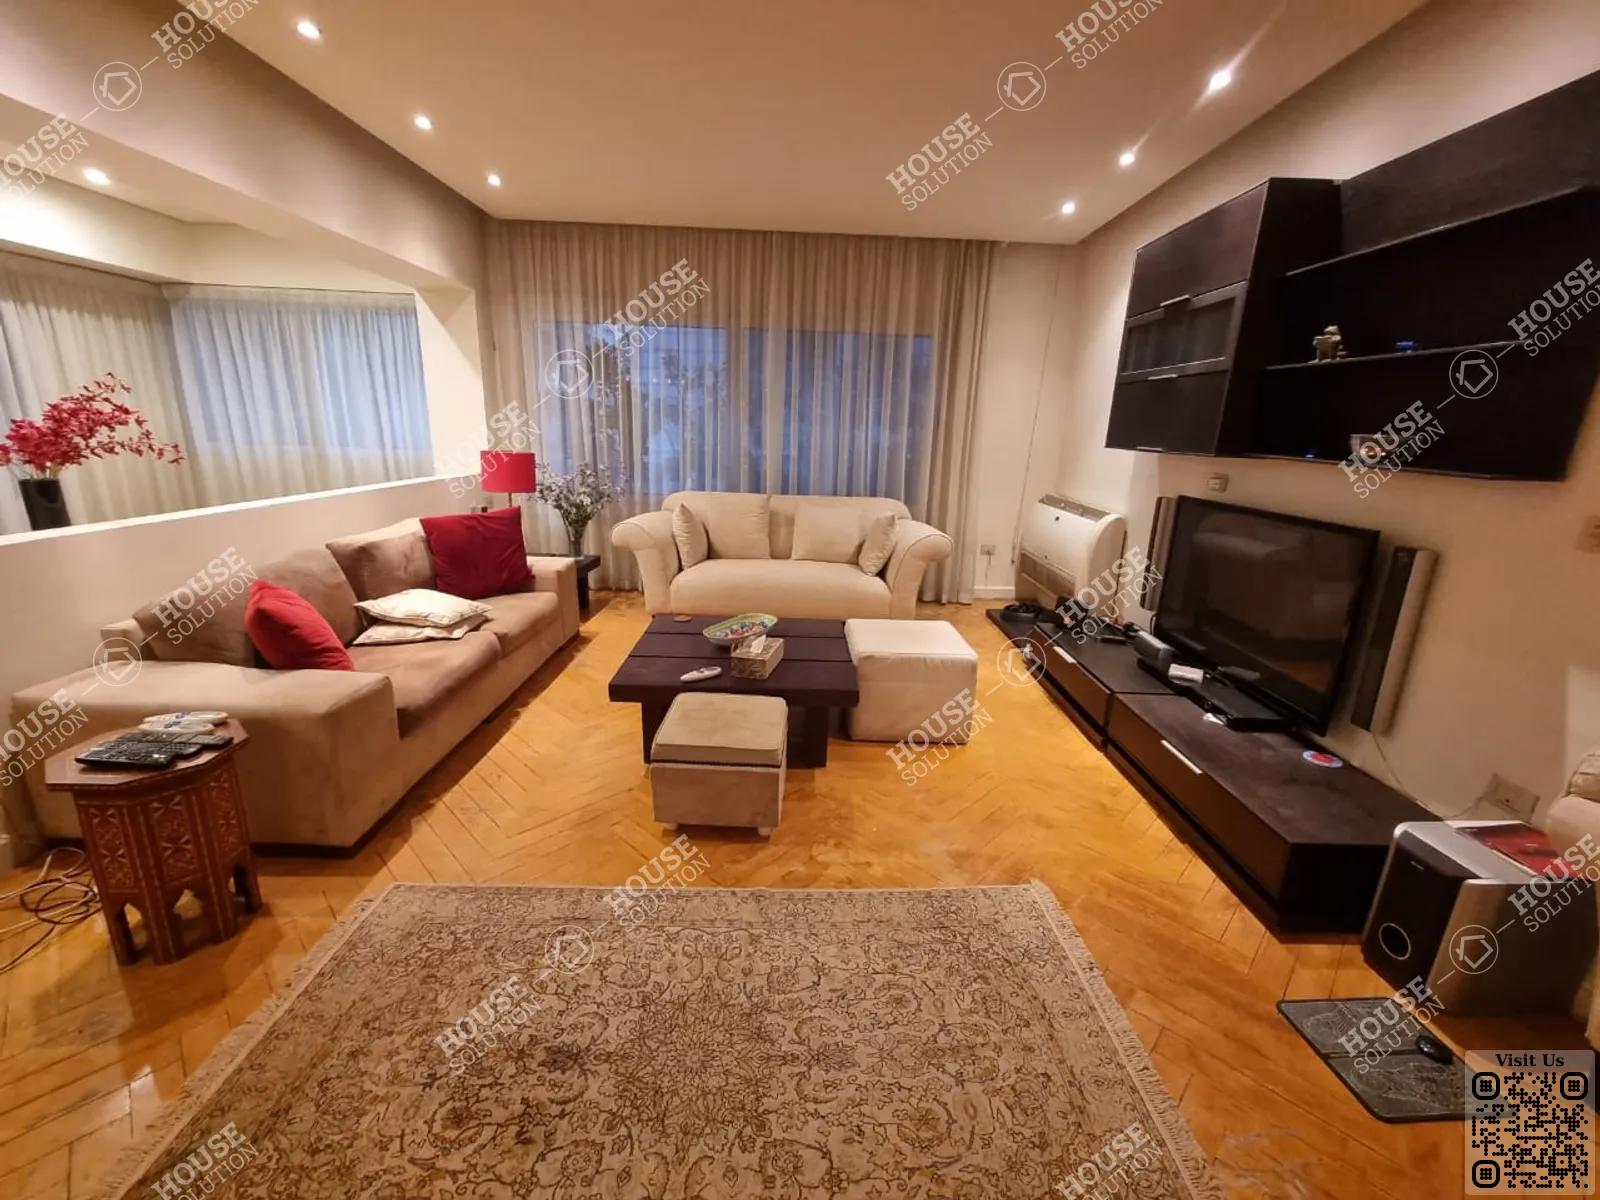 RECEPTION  @ Apartments For Sale In Maadi Maadi Degla Area: 165 m² consists of 2 Bedrooms 3 Bathrooms Furnished 5 stars #5686-0